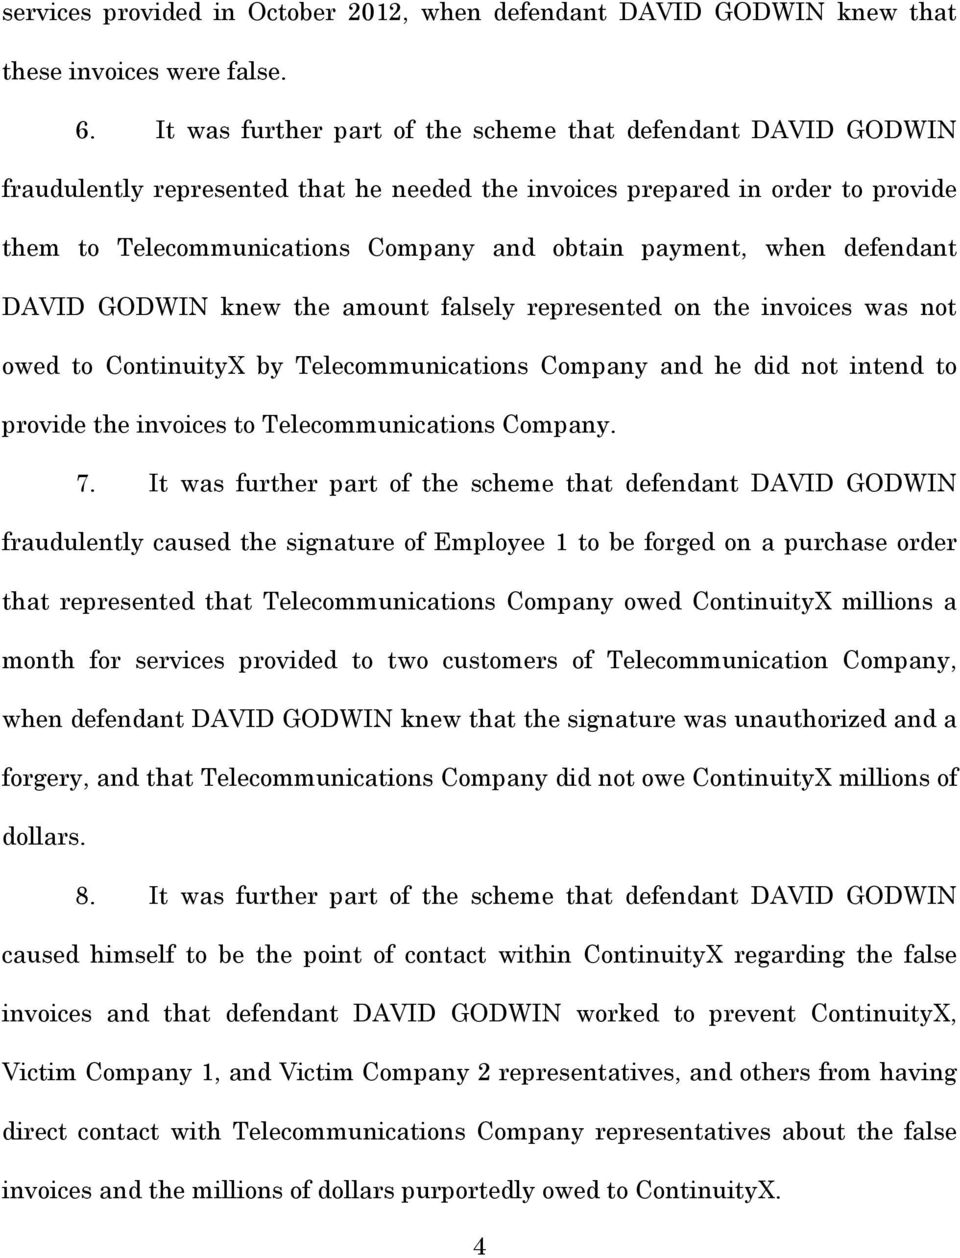 when defendant DAVID GODWIN knew the amount falsely represented on the invoices was not owed to ContinuityX by Telecommunications Company and he did not intend to provide the invoices to